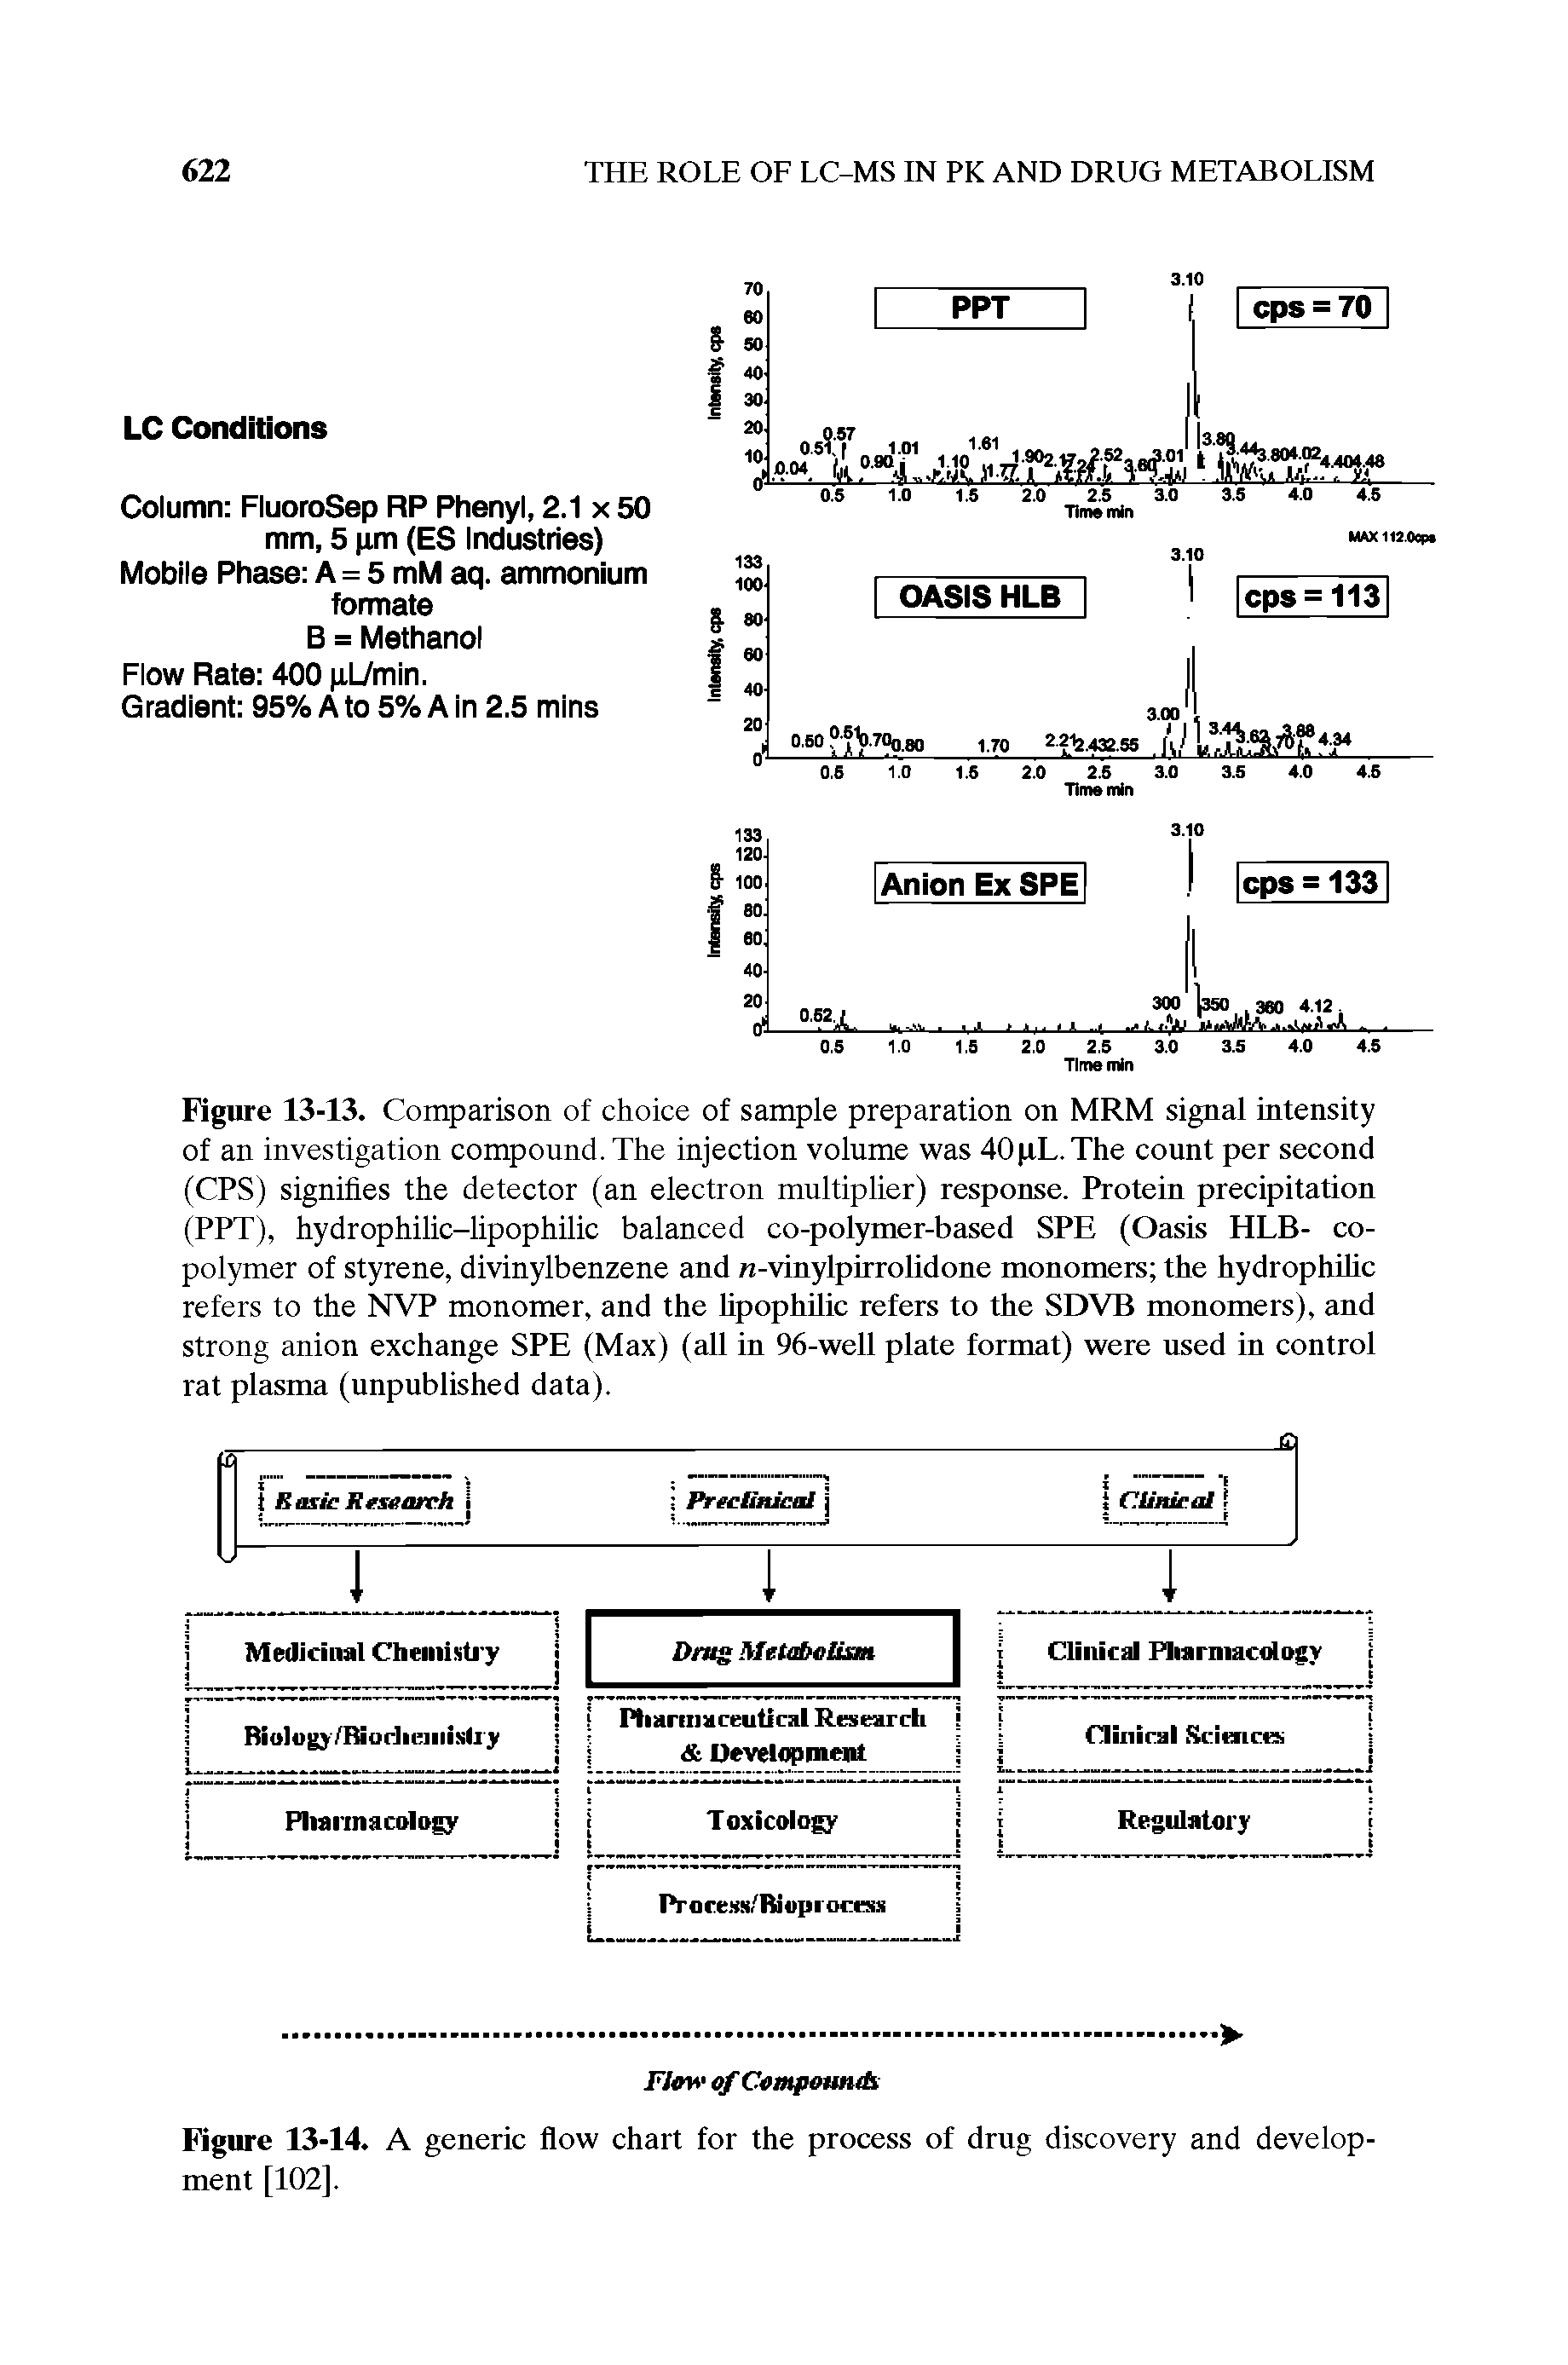 Figure 13-13. Comparison of choice of sample preparation on MRM signal intensity of an investigation compound. The injection volume was 40pL.The count per second (CPS) signifies the detector (an electron multiplier) response. Protein precipitation (PPT), hydrophilic-lipophilic balanced co-polymer-based SPE (Oasis HLB- copolymer of styrene, divinylbenzene and -vinylpirrolidone monomers the hydrophihc refers to the NVP monomer, and the lipophilic refers to the SDVB monomers), and strong anion exchange SPE (Max) (all in 96-well plate format) were used in control rat plasma (unpublished data).